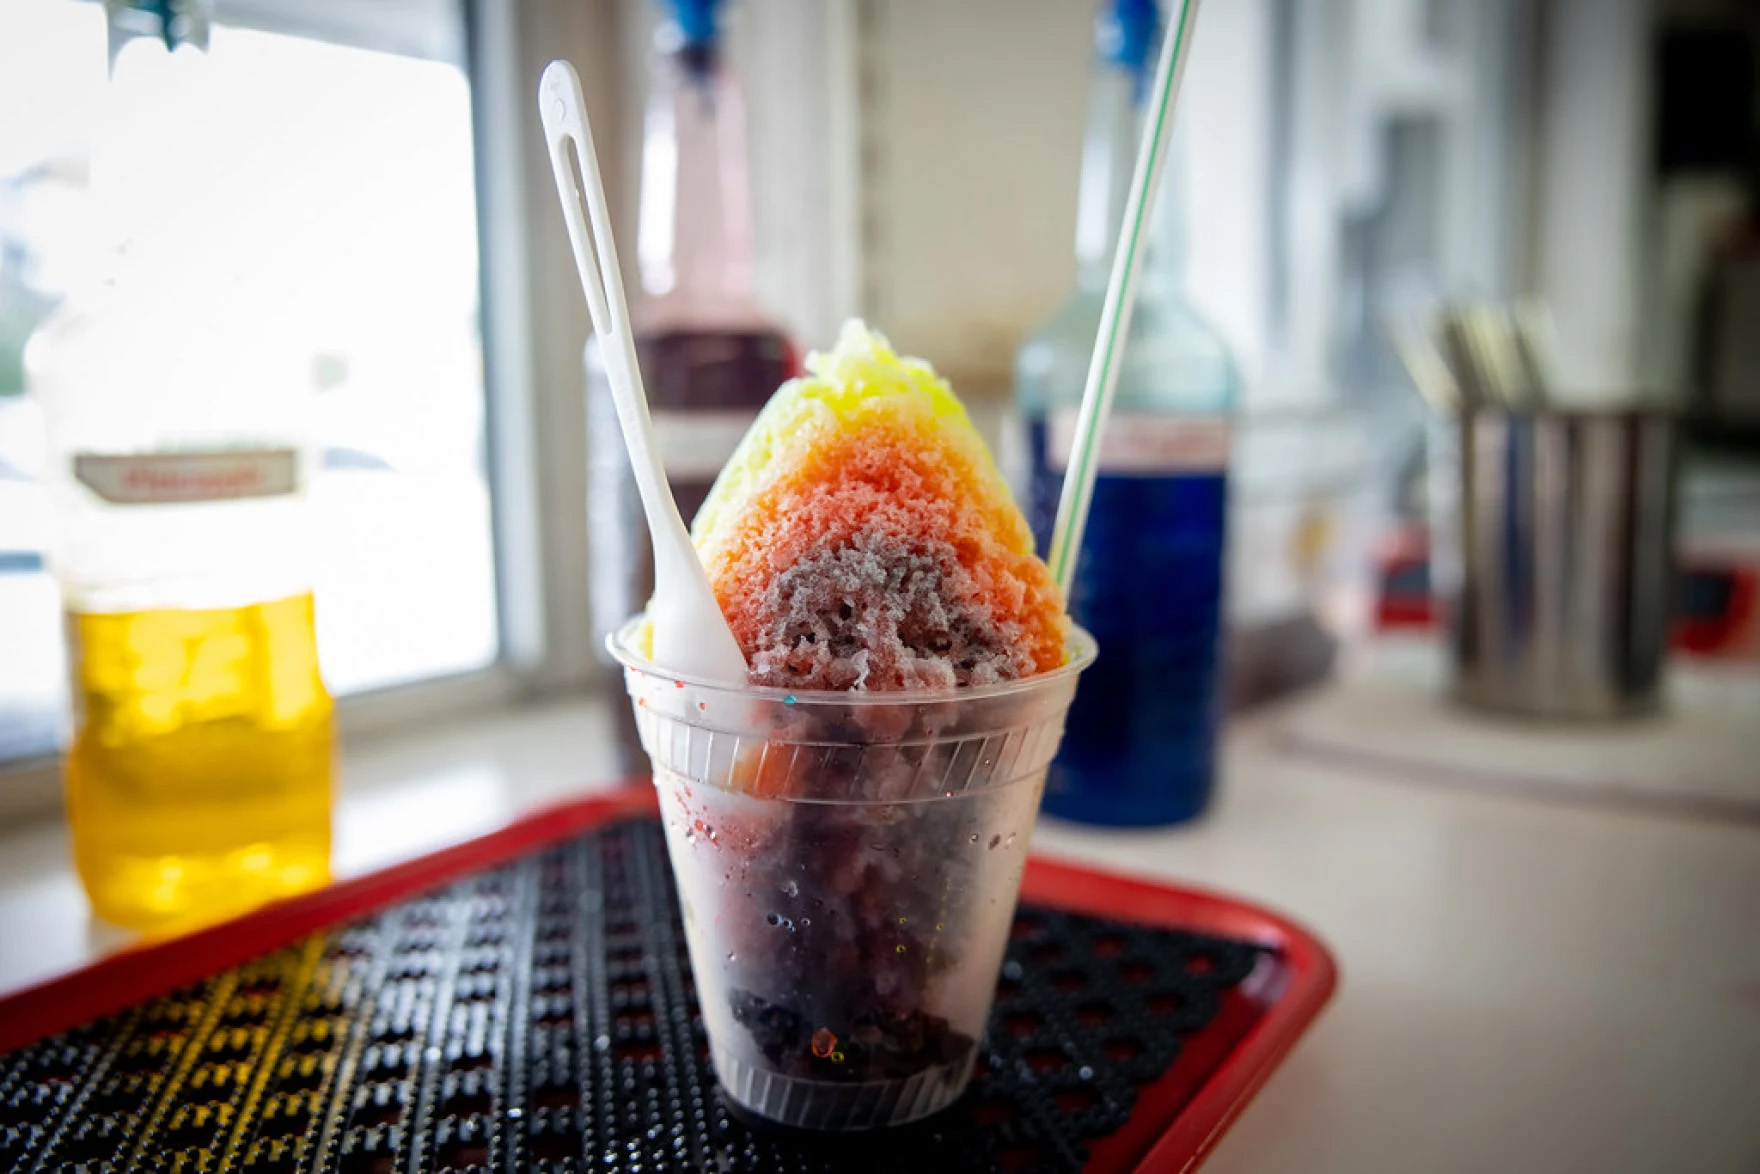 A snow cone is seen with a straw and spoon sticking out of the cup. The shaved ice is yellow, red and purple in color.